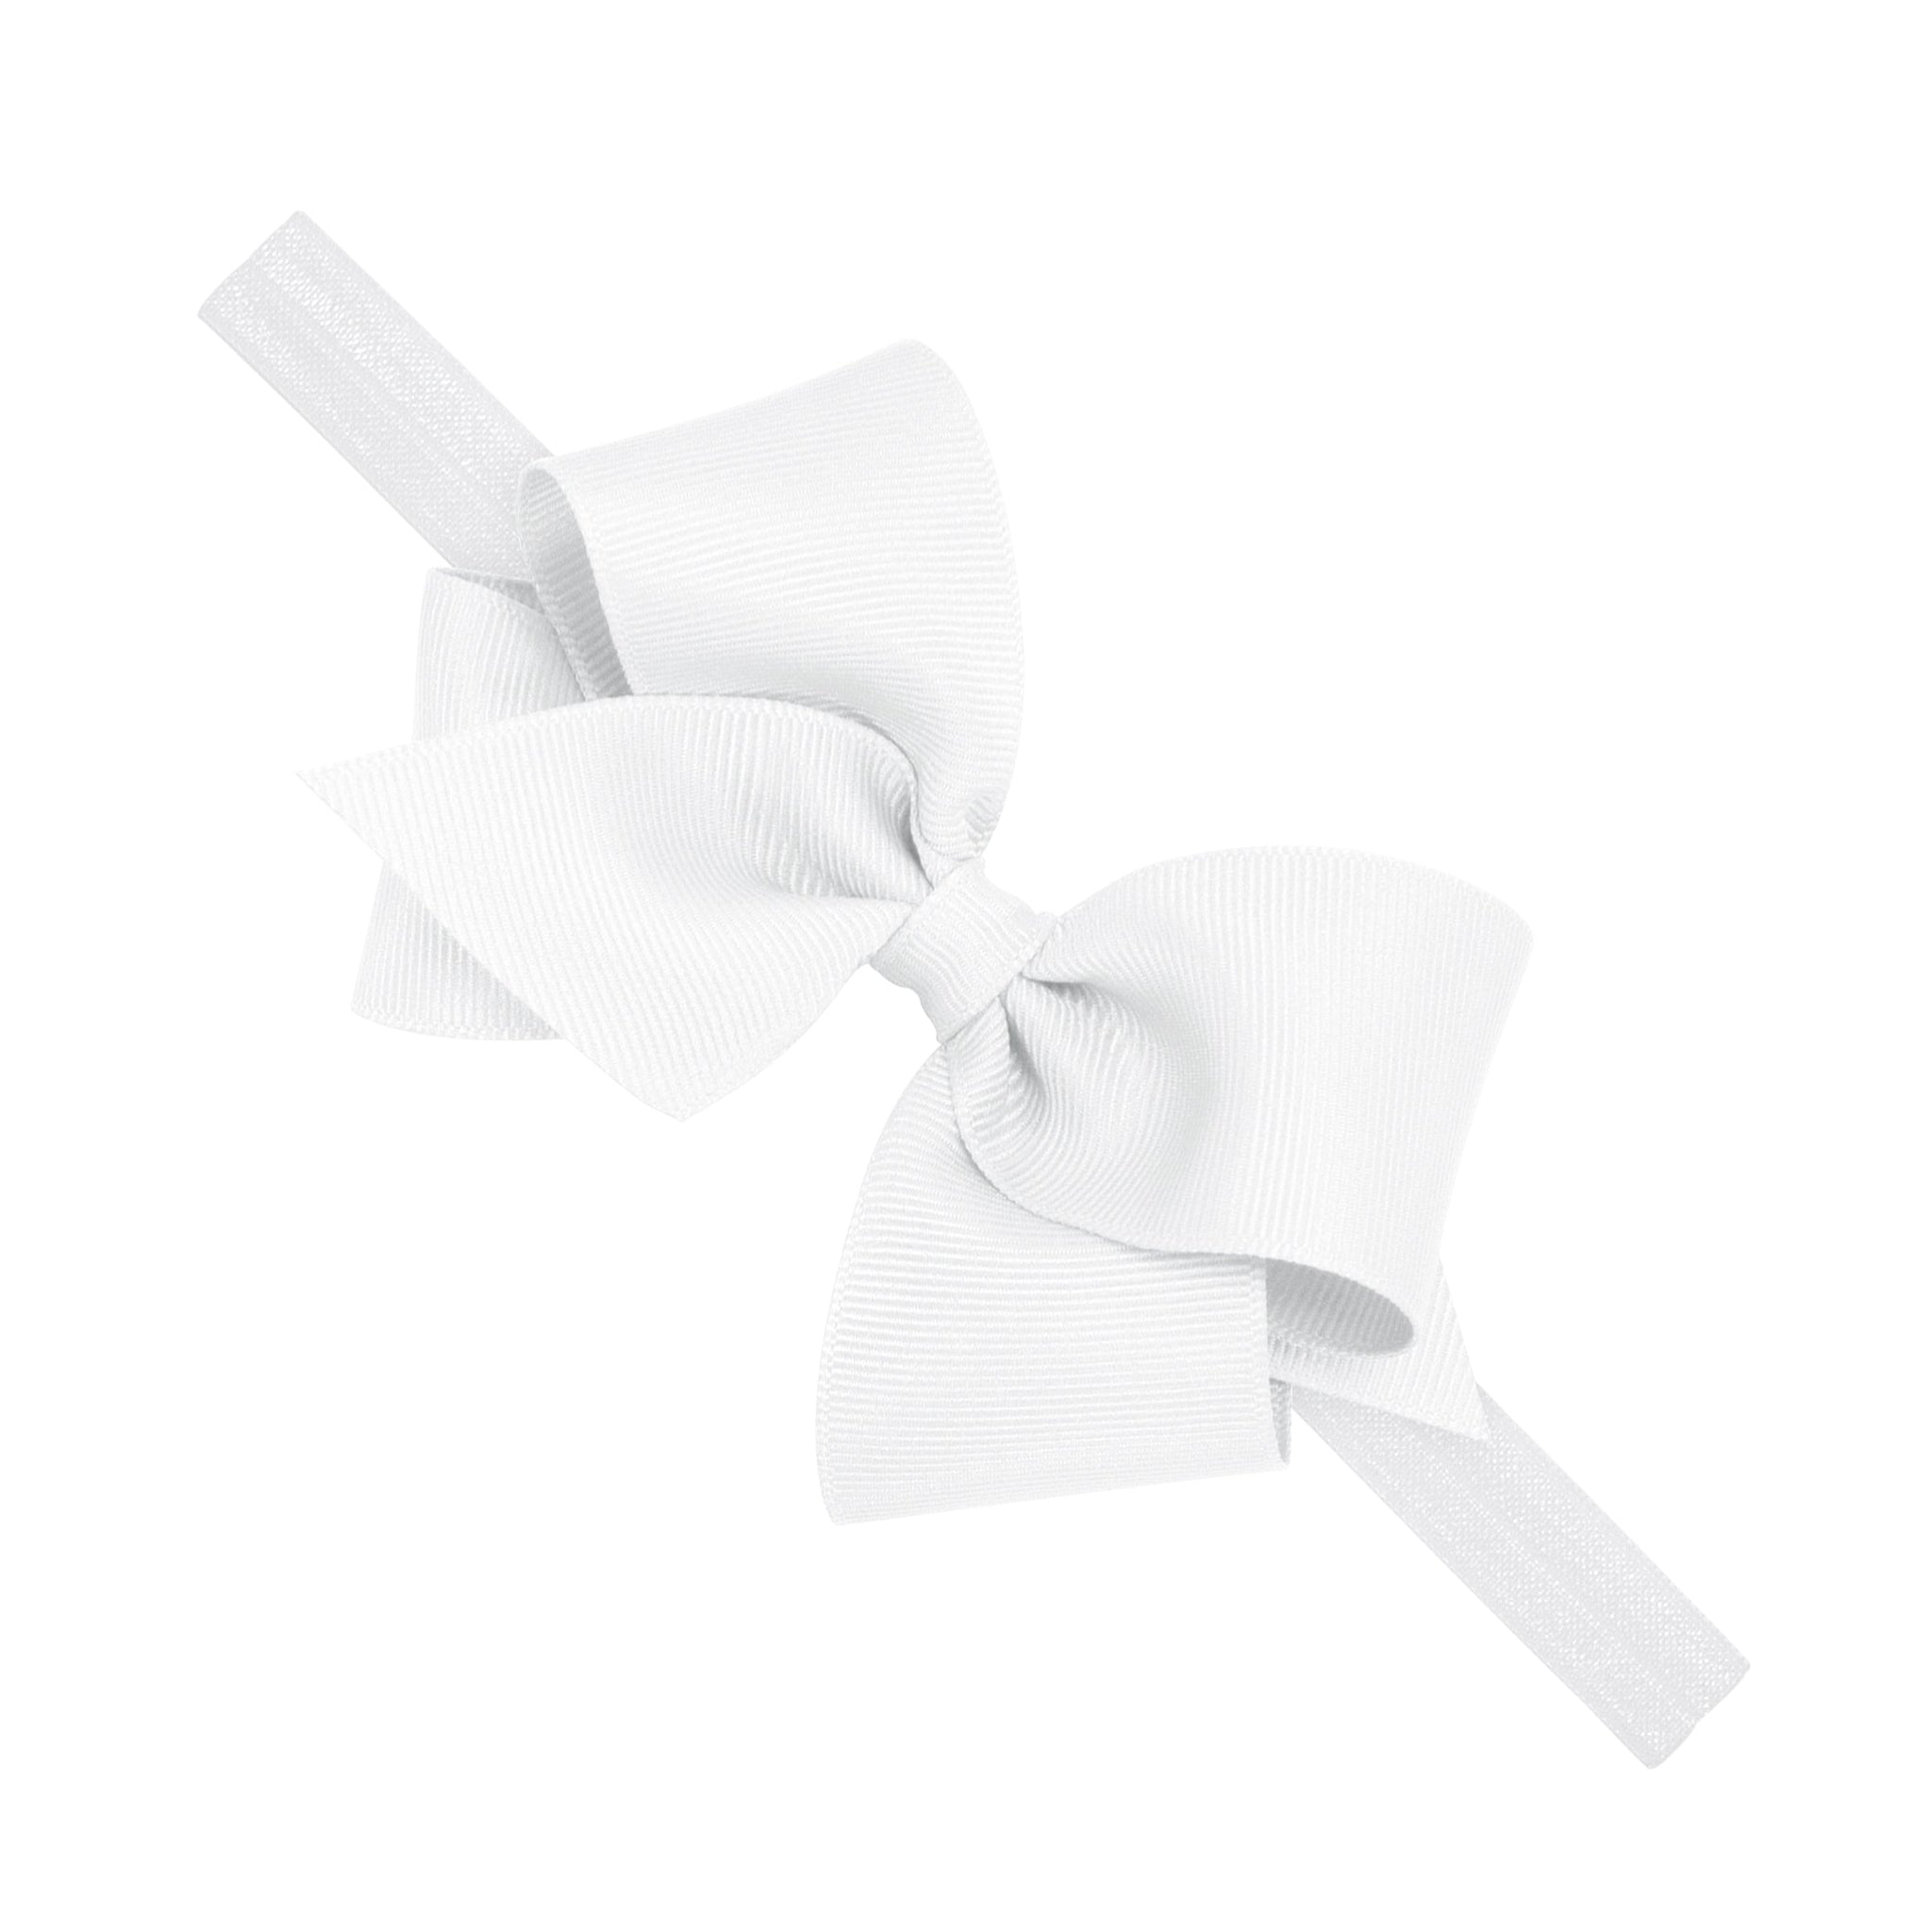 Small Classic Grosgrain Bow on Baby Band